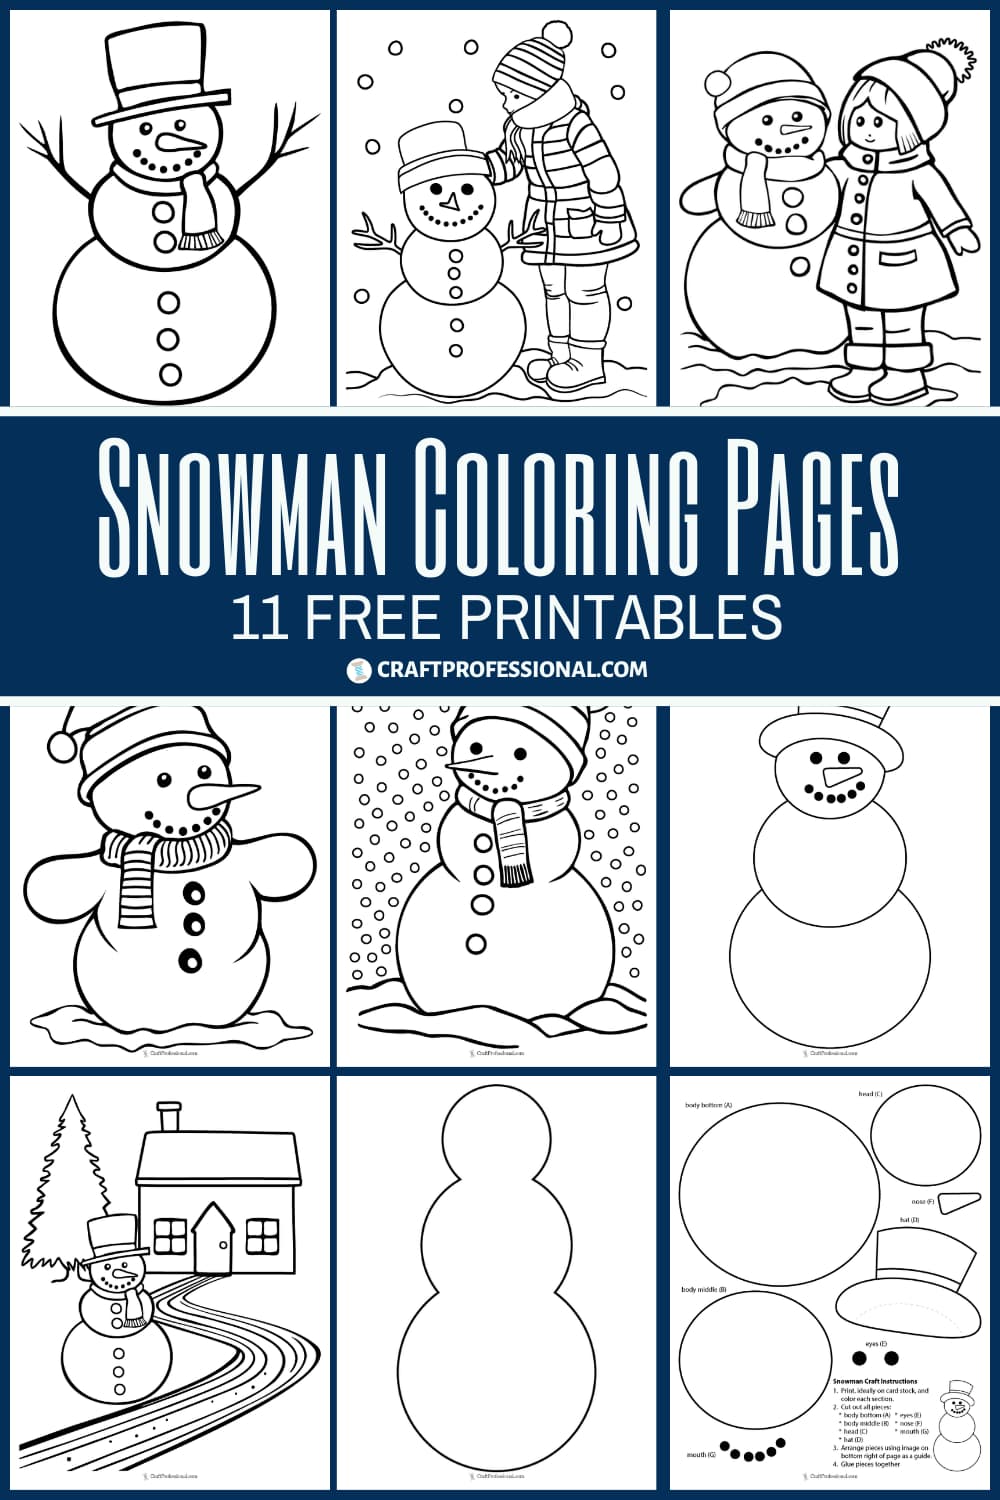 https://www.craftprofessional.com/images/snowman-coloring-pages-01.jpg